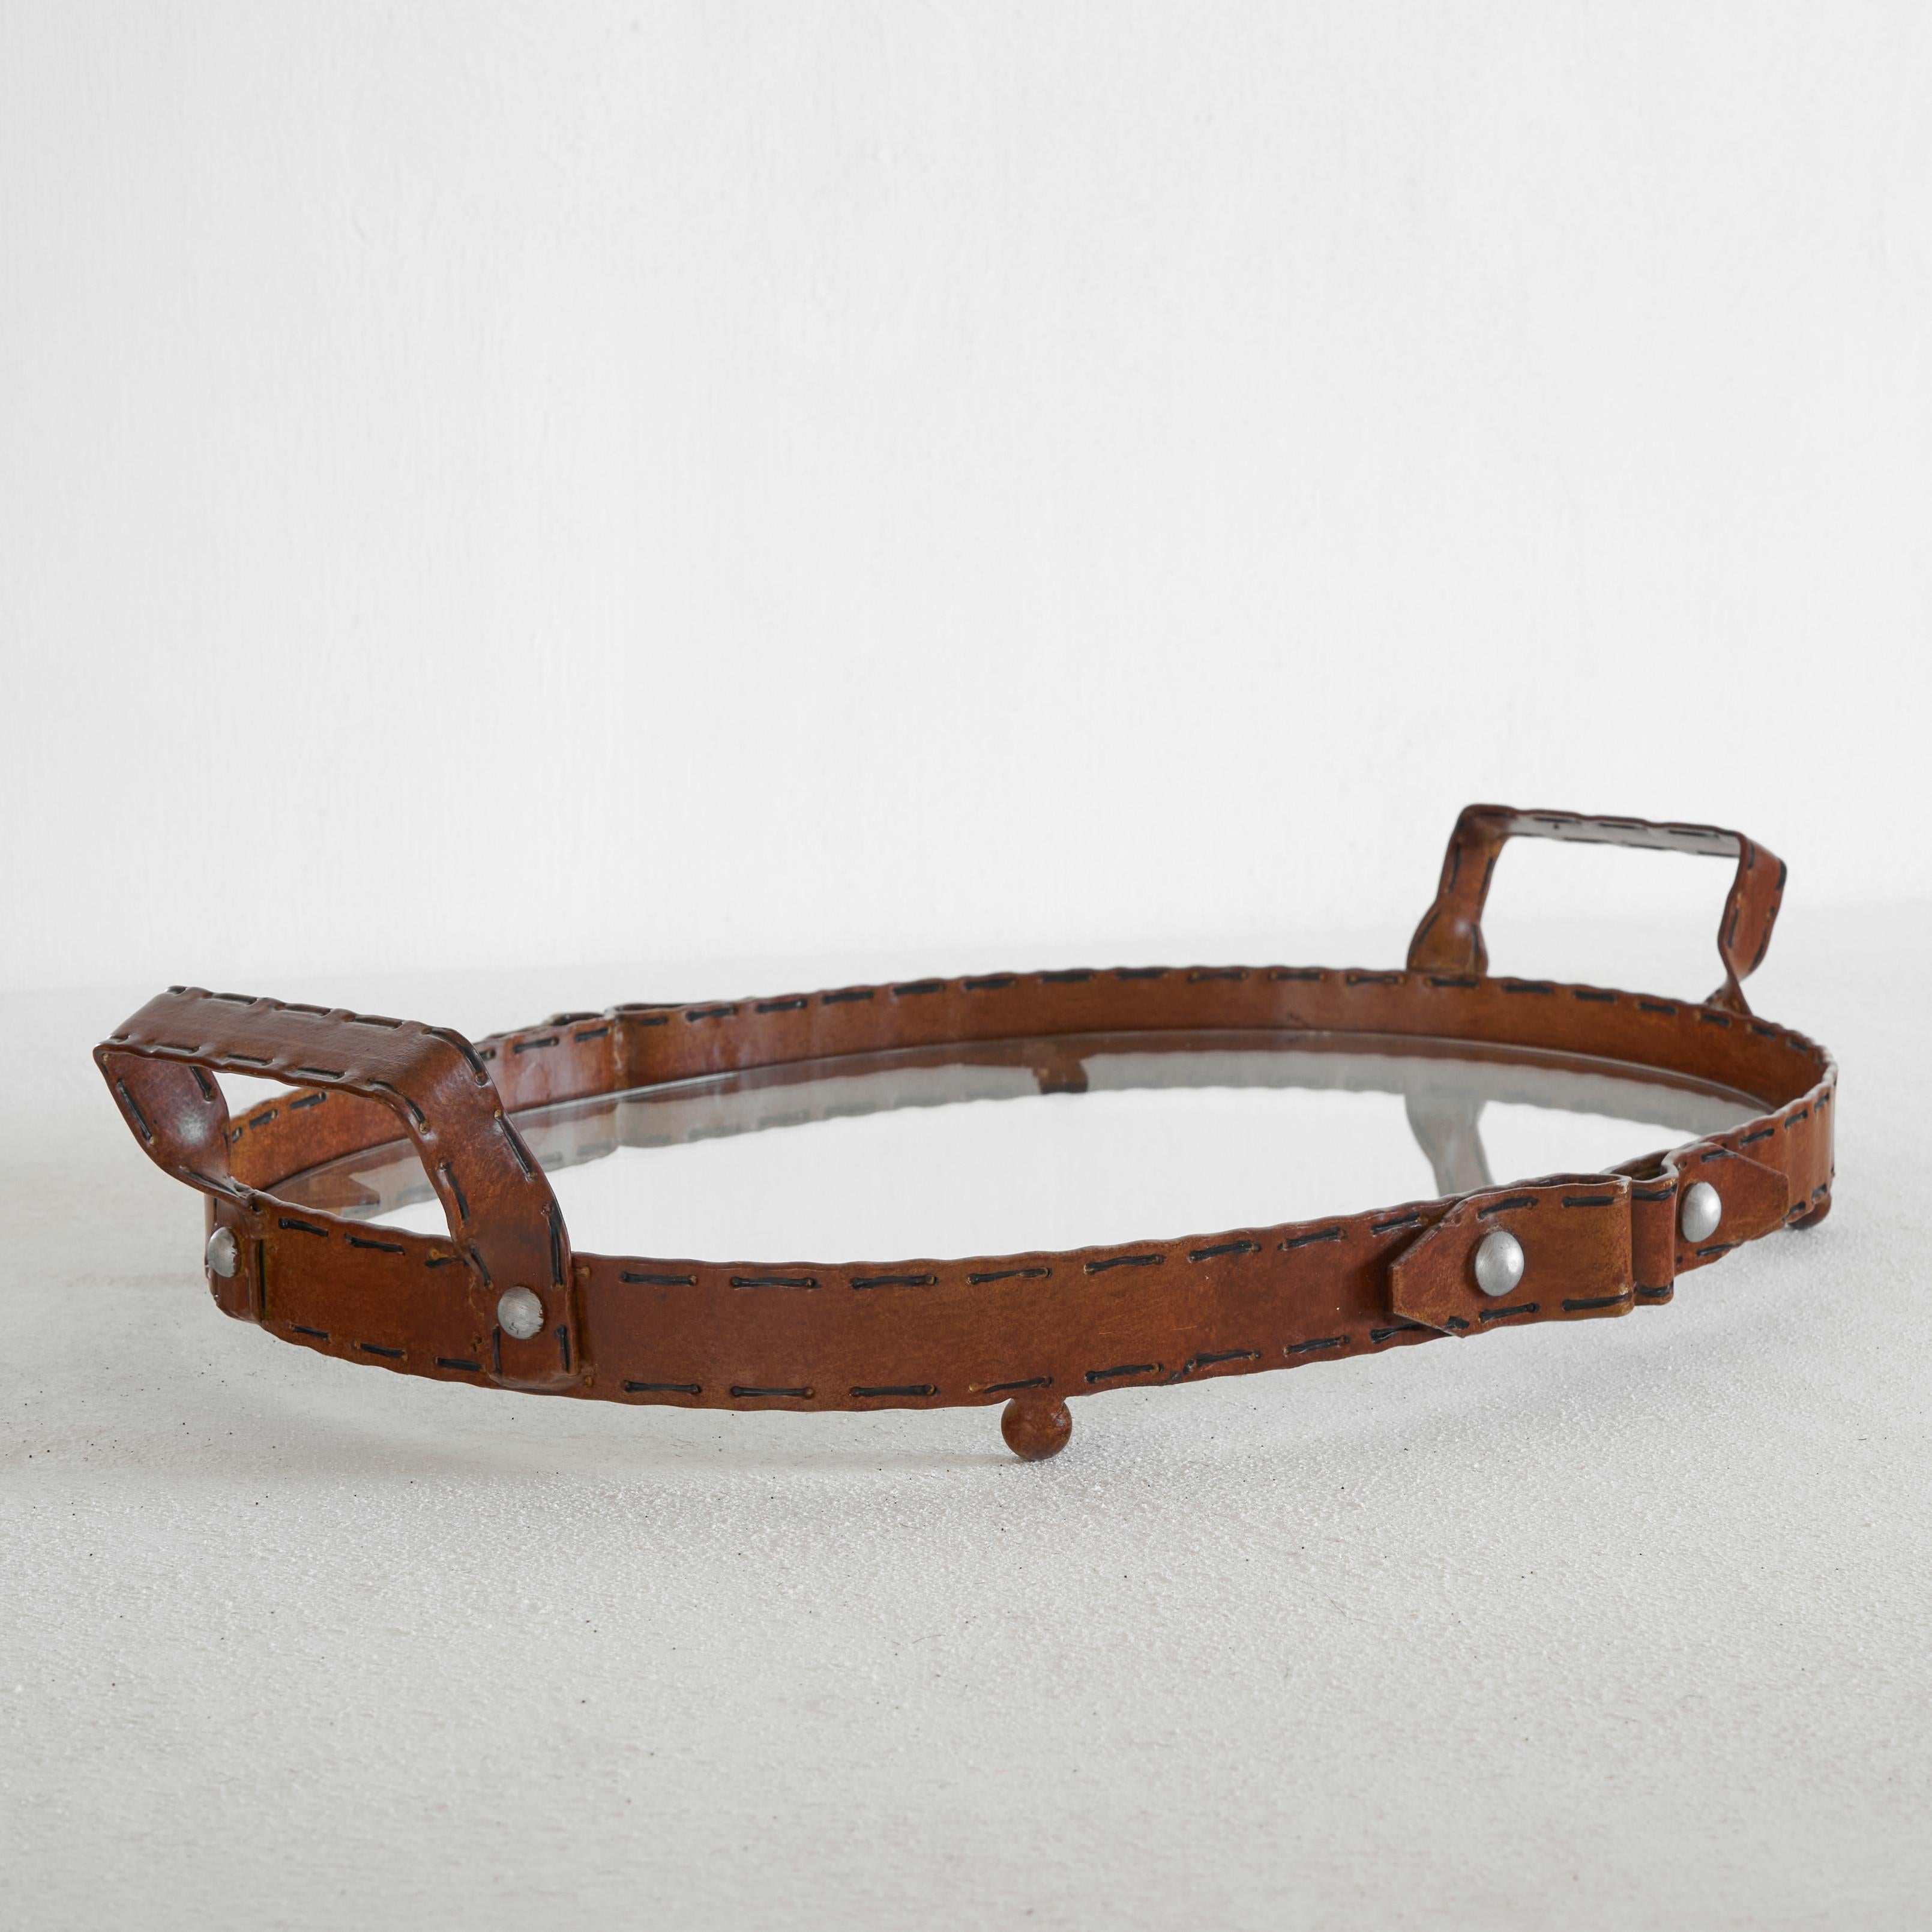 Belt-like serving tray in metal and glass.

Very unusual piece in metal and glass. This serving tray is made out of metal, but looks like it is made out of a leather belt. The cognac colored leather-like appearance of the metal is skillfully done